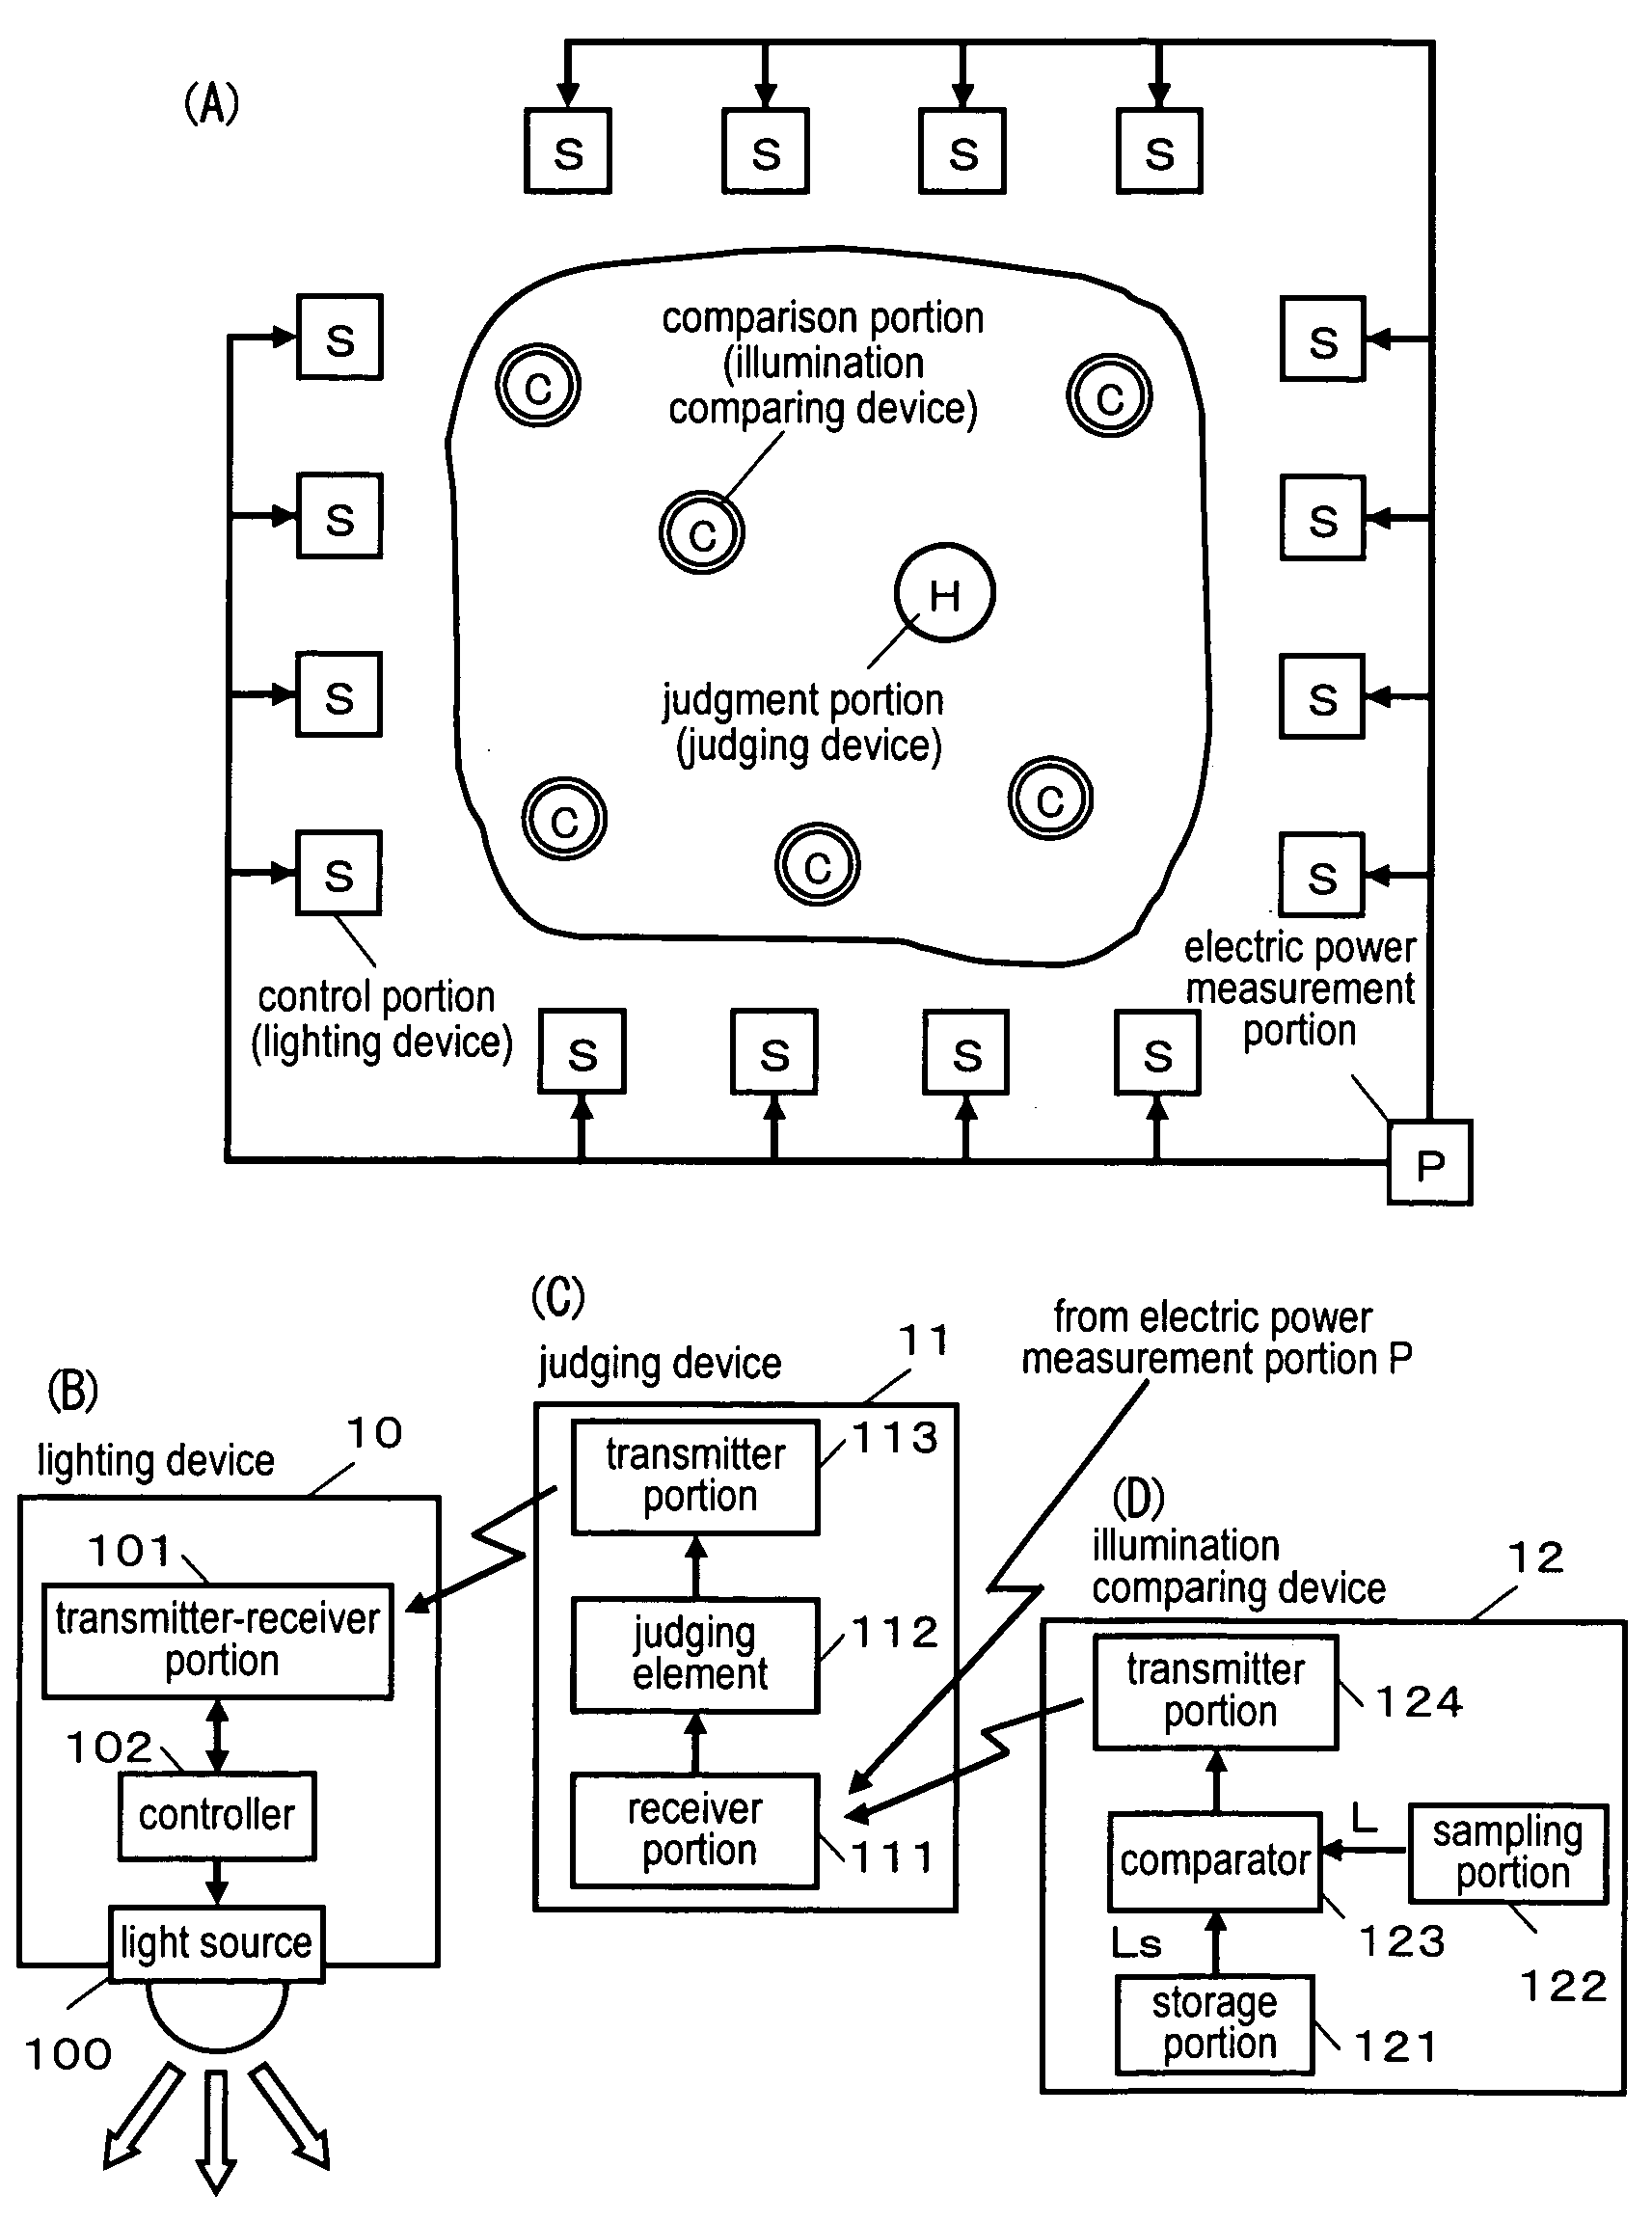 Control system and lighting control system